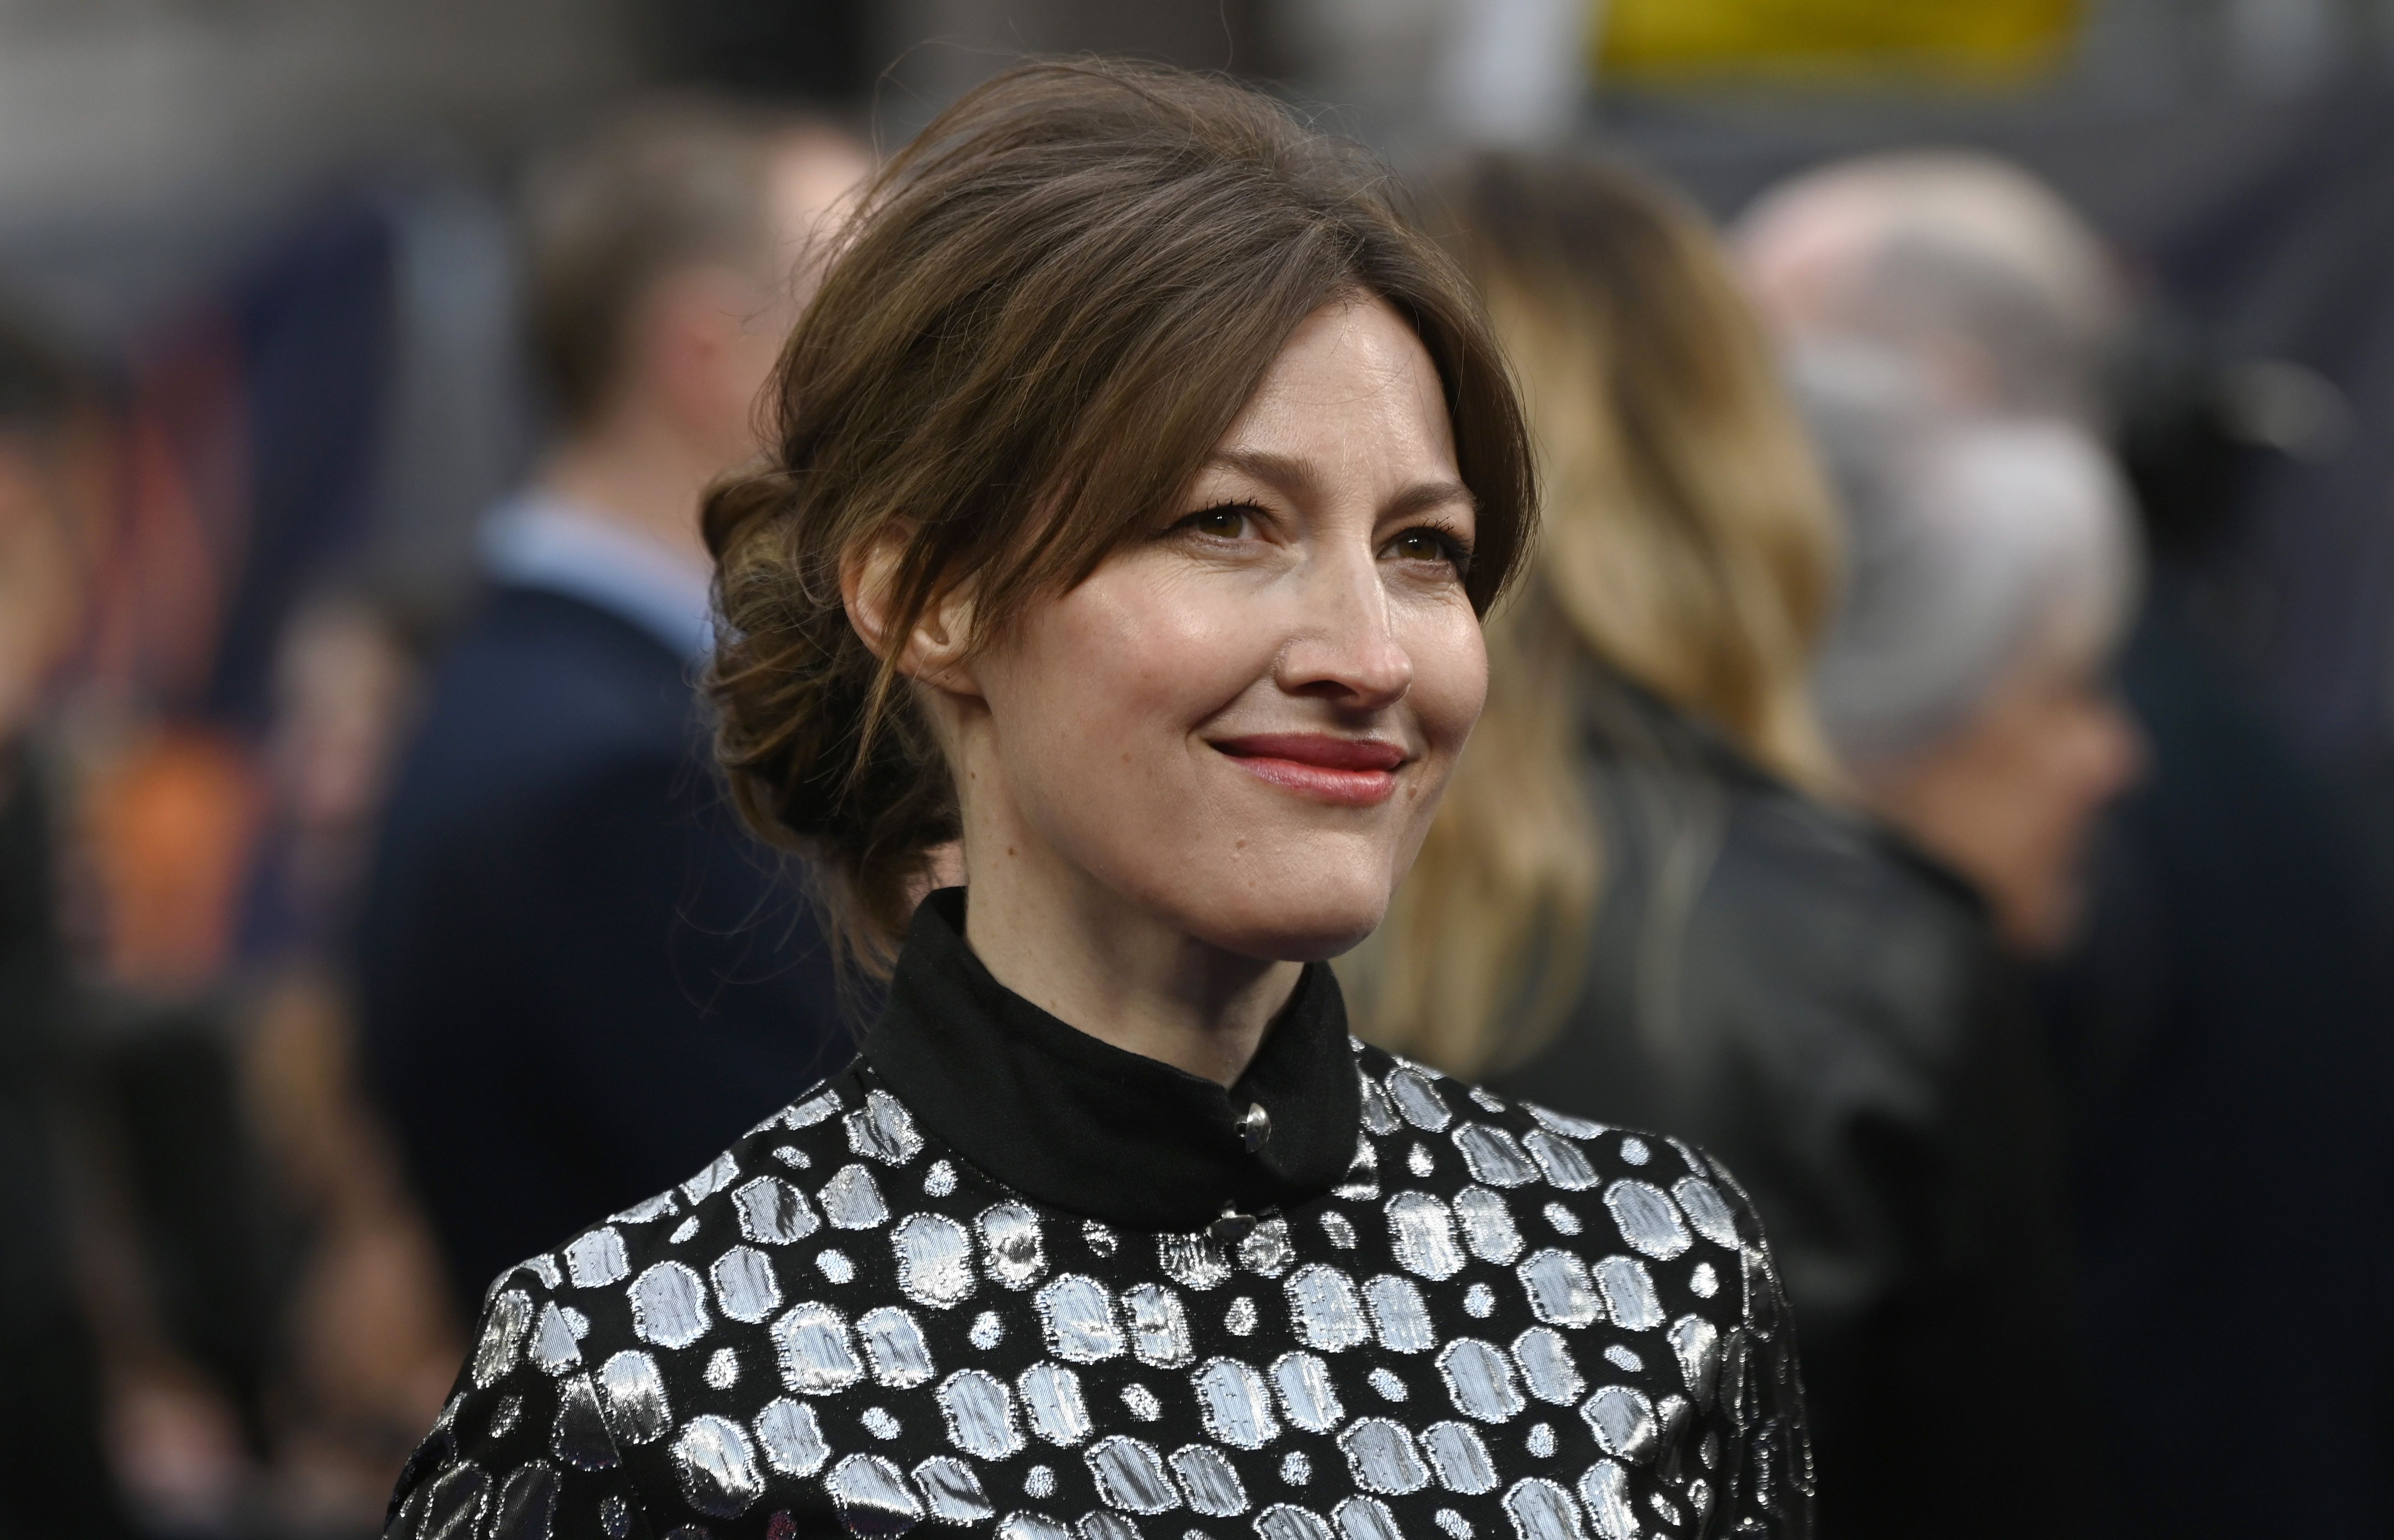 Line of Duty's Kelly Macdonald: What else has she been in? - Radio X